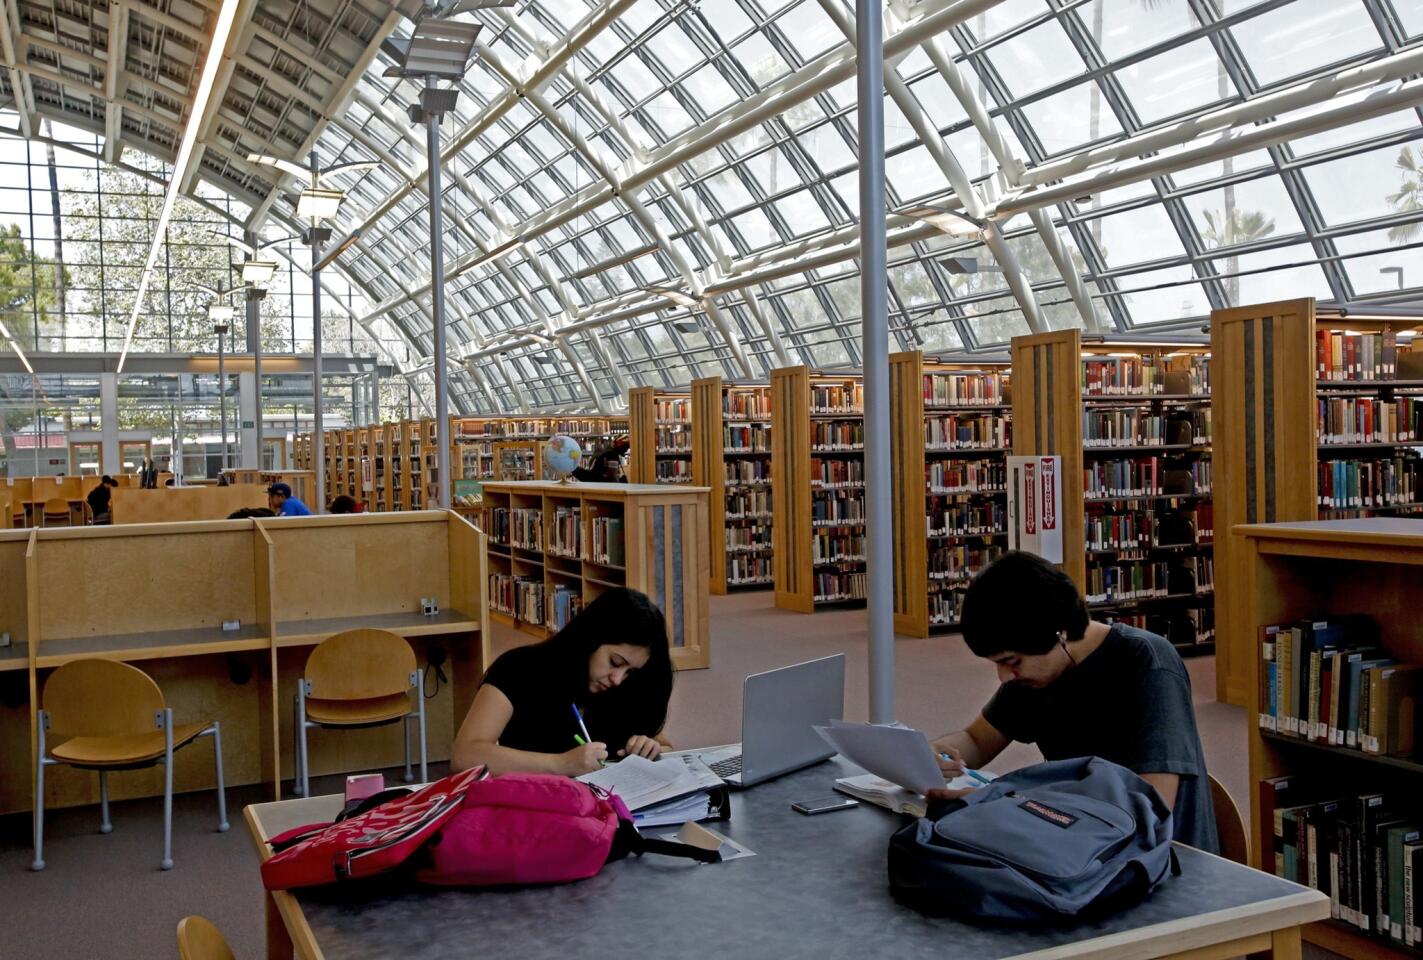 Nursing students Monica Lanco, 20, left, and Fernando Gomez, 22, study in the library before the ribbon-cutting ceremony Tuesday at El Camino College Compton Center. The state-of-the-art library opened last month after a seven-year delay.